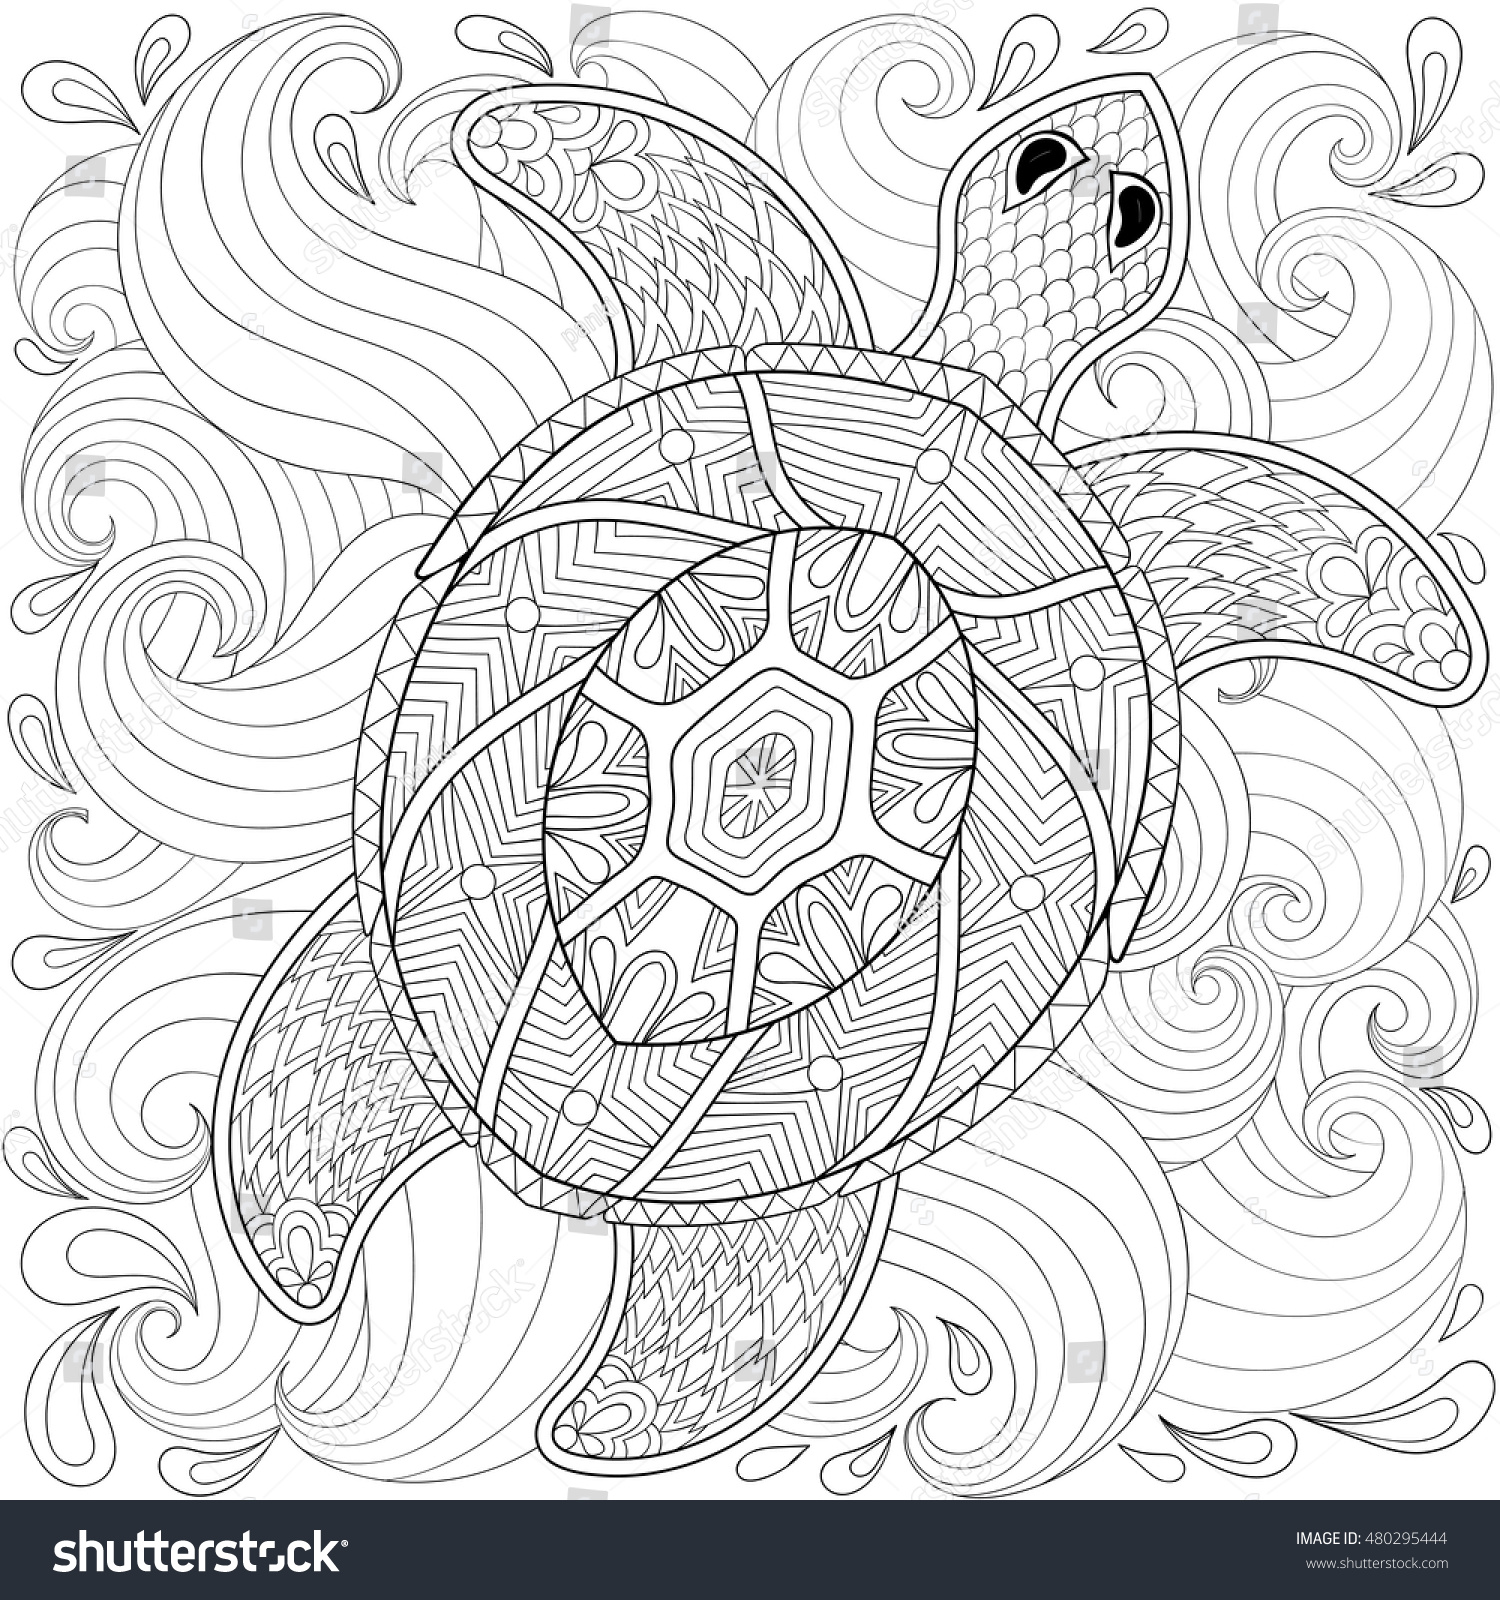 SVG of Turtle in ocean waves, zentangle style. Freehand sketch for adult coloring page, doodle elements. Ornamental artistic vector illustration for tattoo, t-shirt print. Sea animal collection. svg